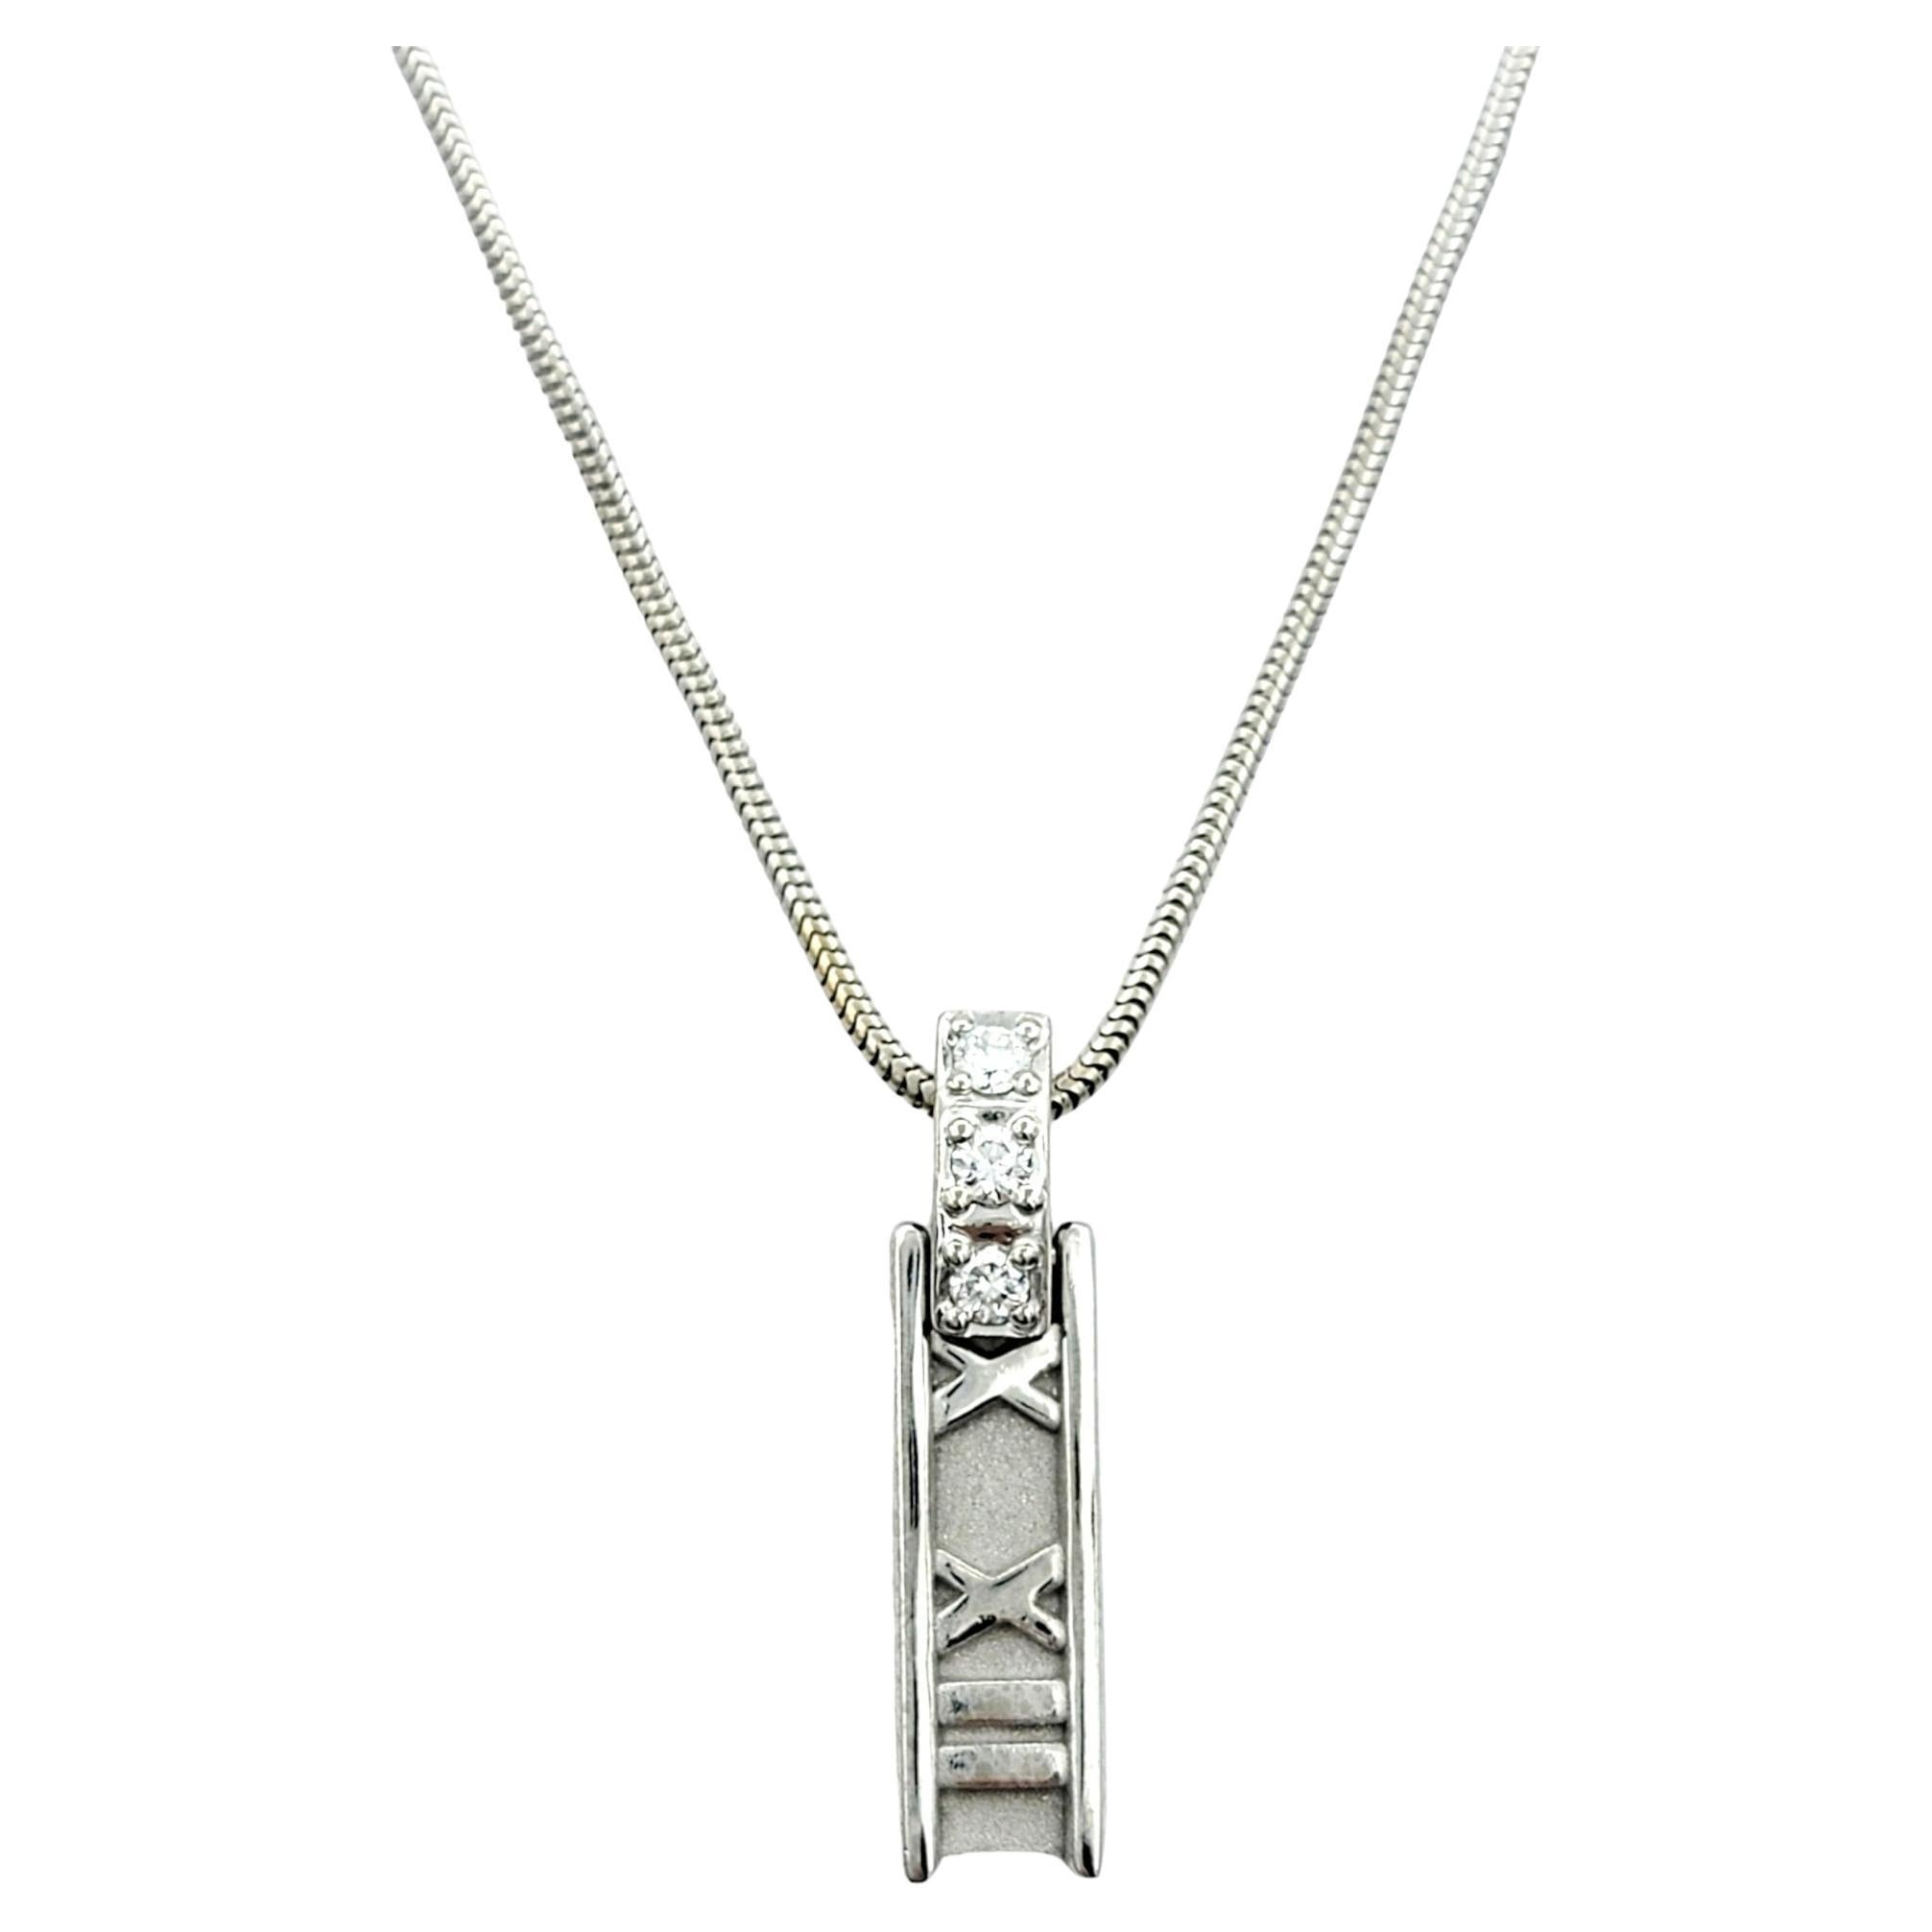 Tiffany & Co. Atlas Collection Vertical Bar Pendant Necklace with Diamonds 